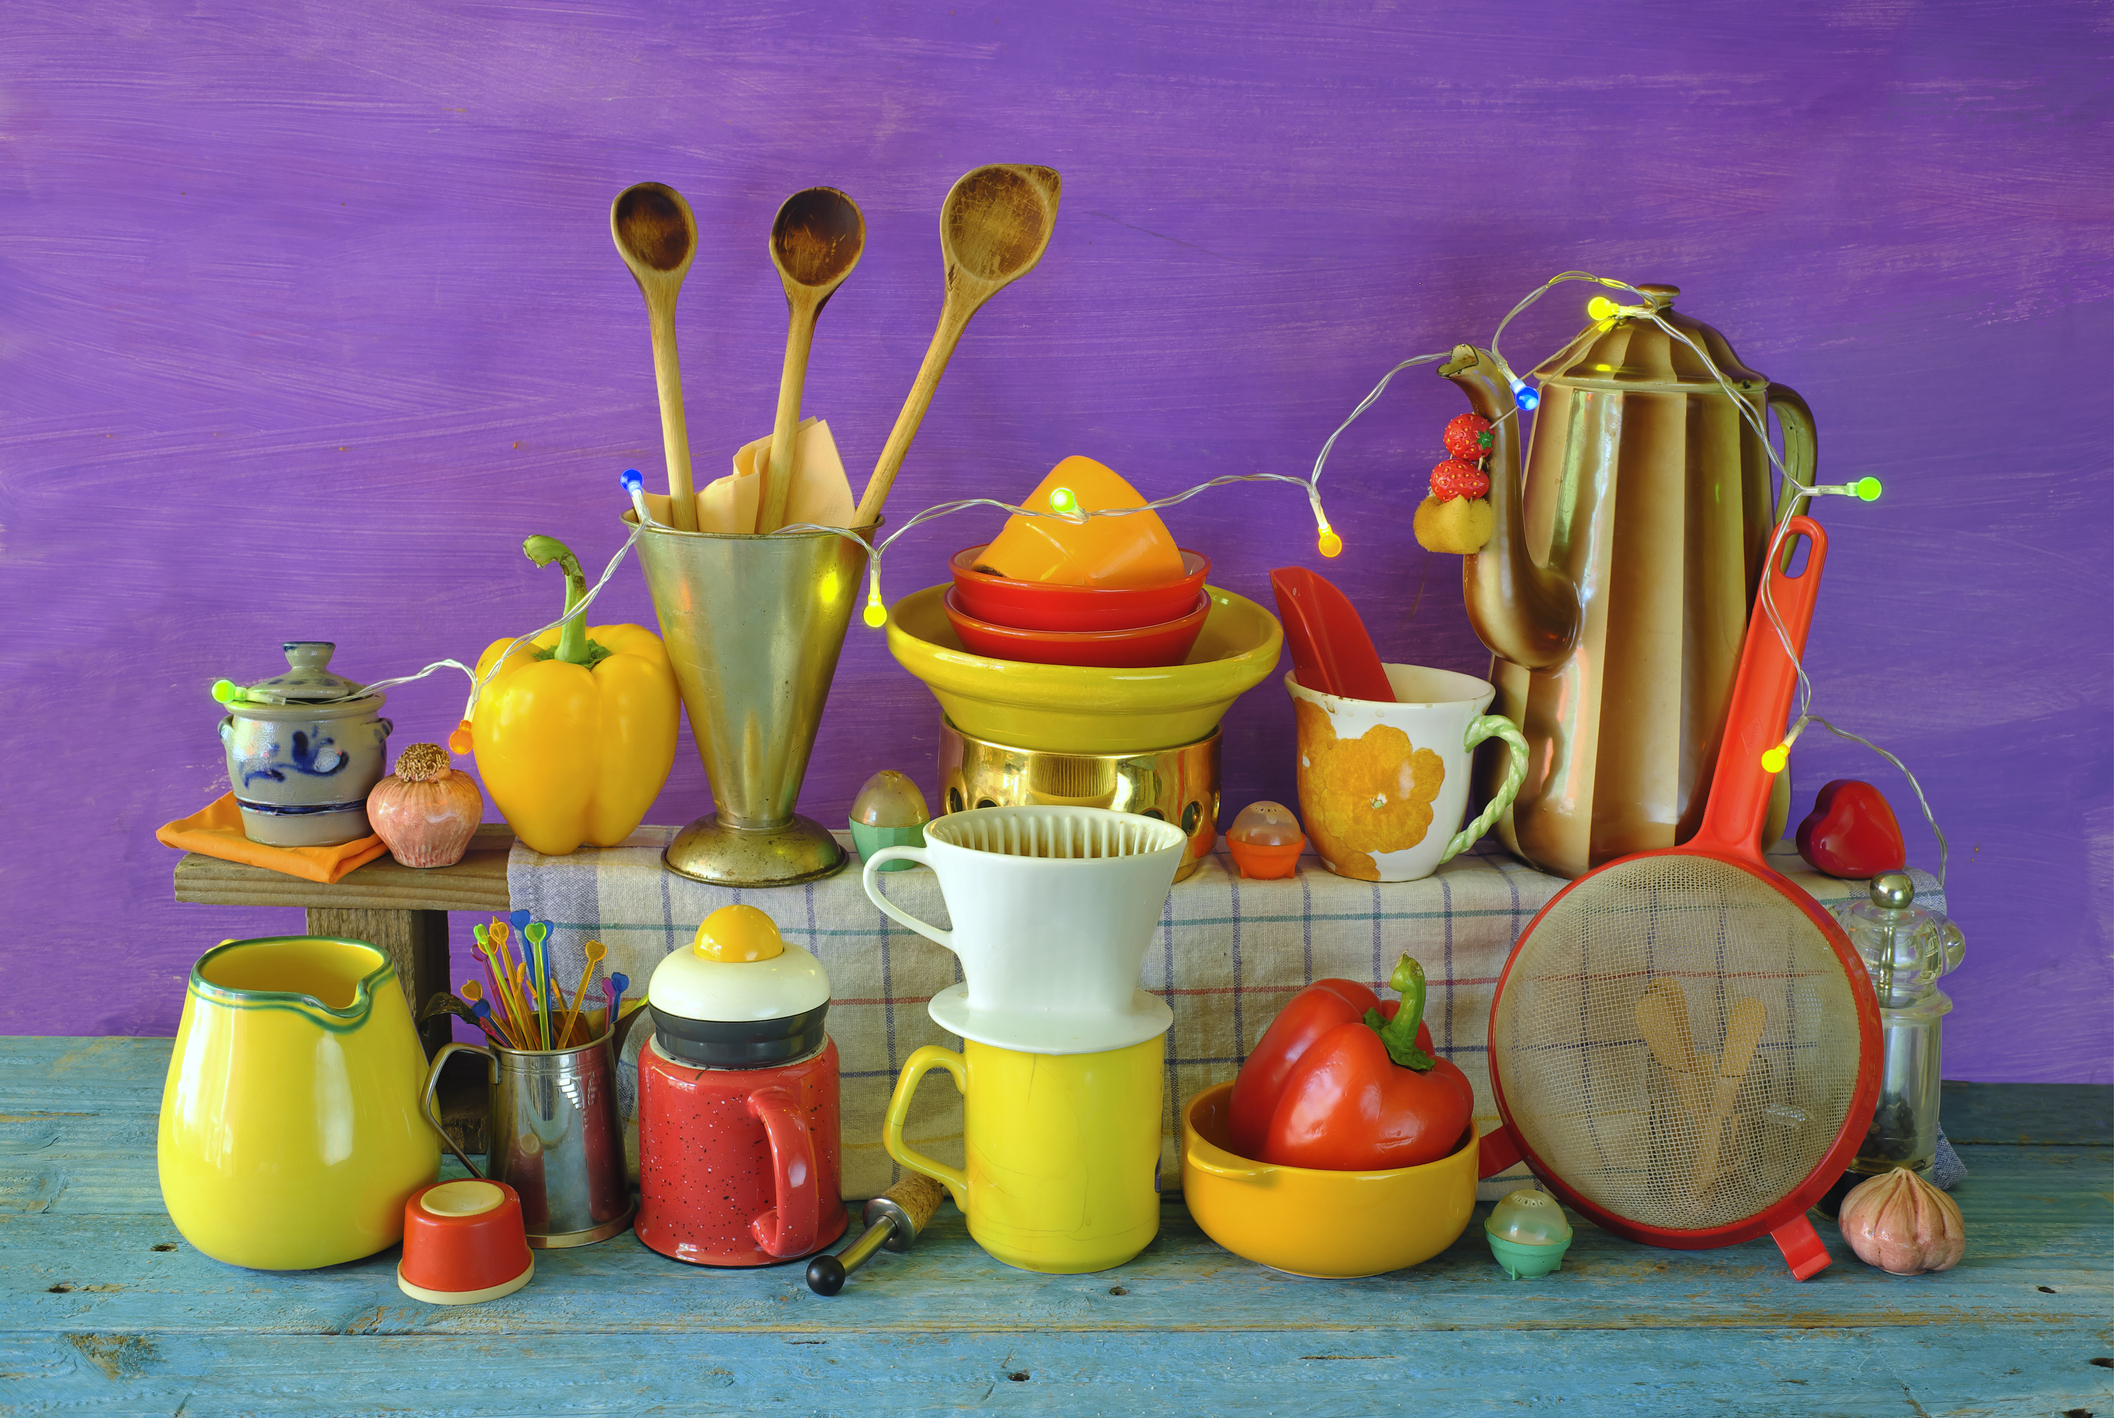 An eclectic assortment of colorful kitchen items